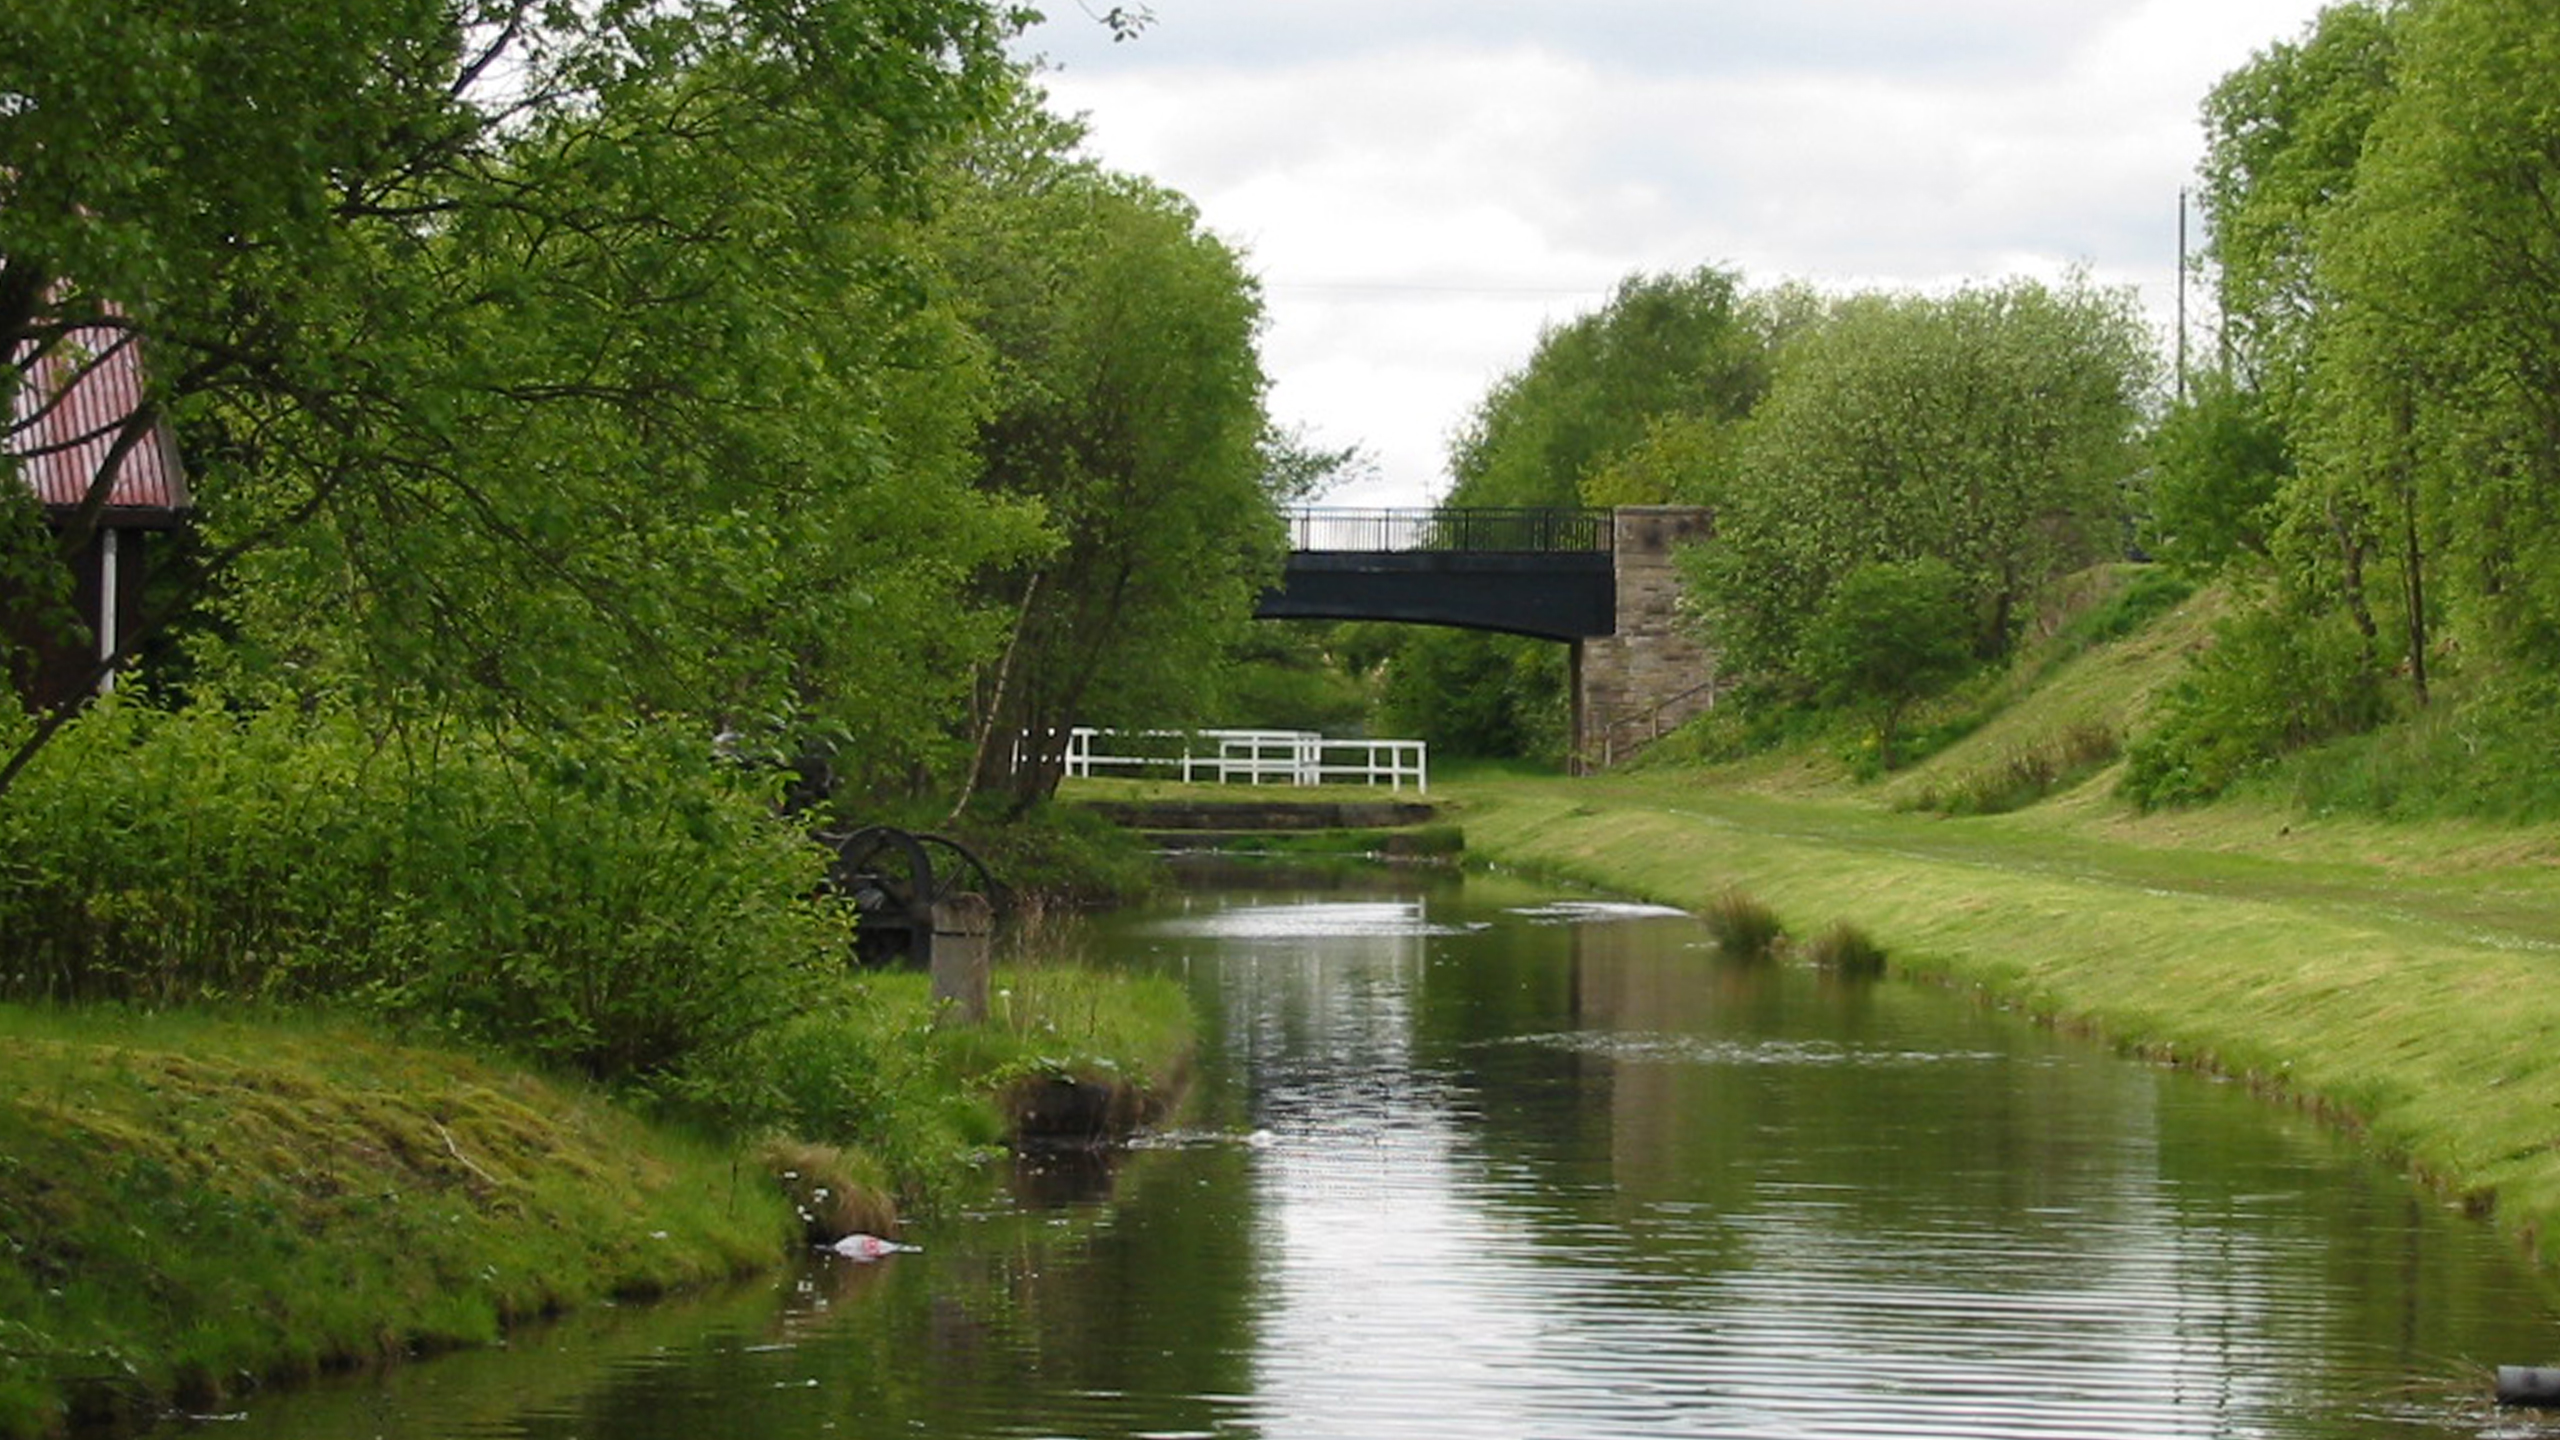 Monkland Canal | The Inland Waterways Association